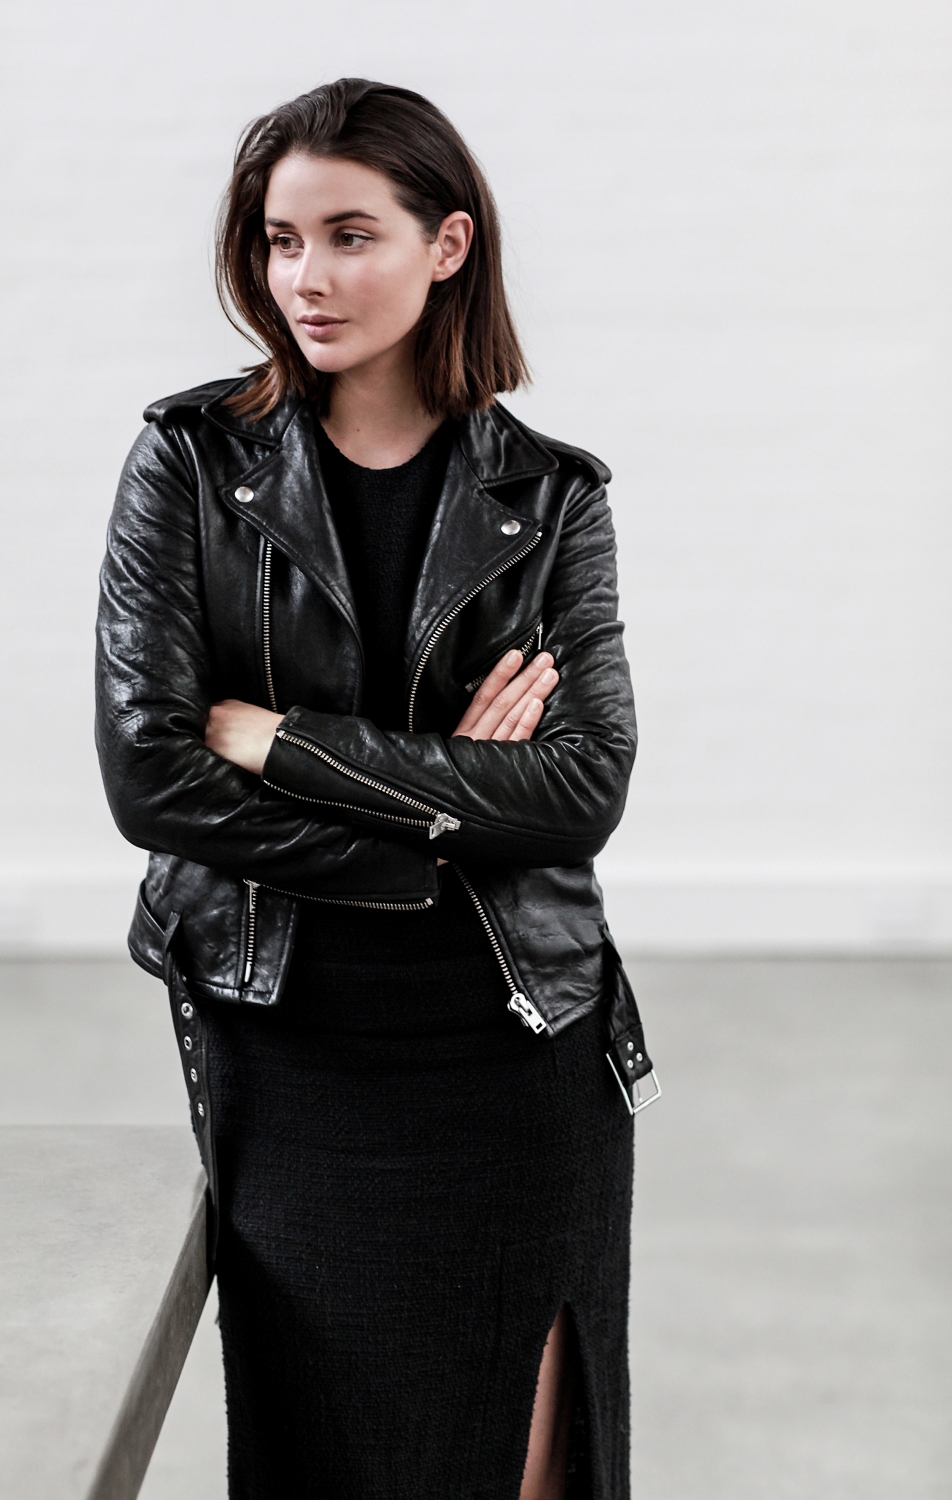 Black dress | Leather Jacket | Minimal | Layering | Matin |Style | Outfit | Harper and Harley